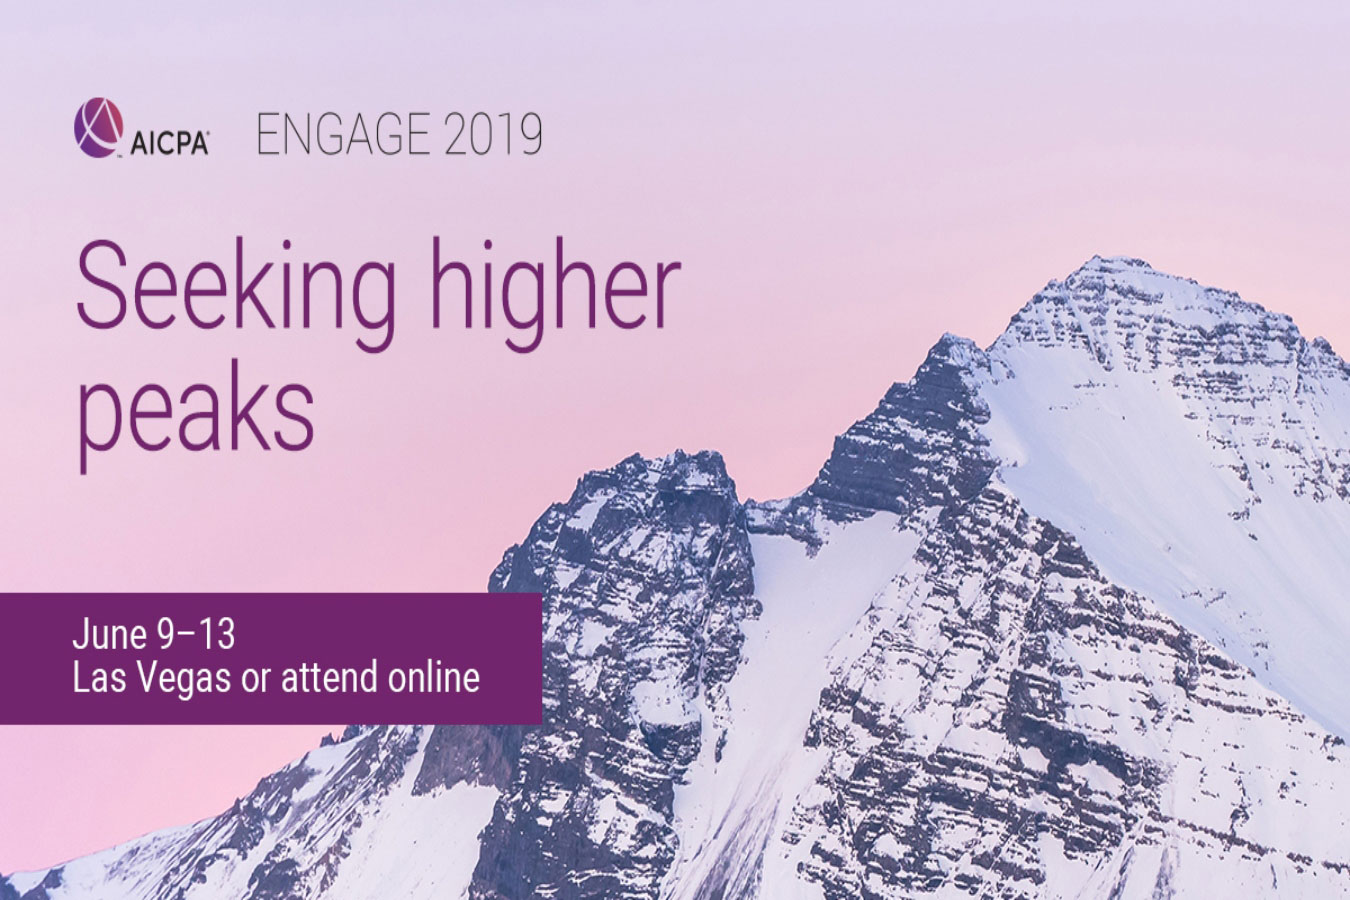 AICPA Engage 2019 Highlights It's All About Change